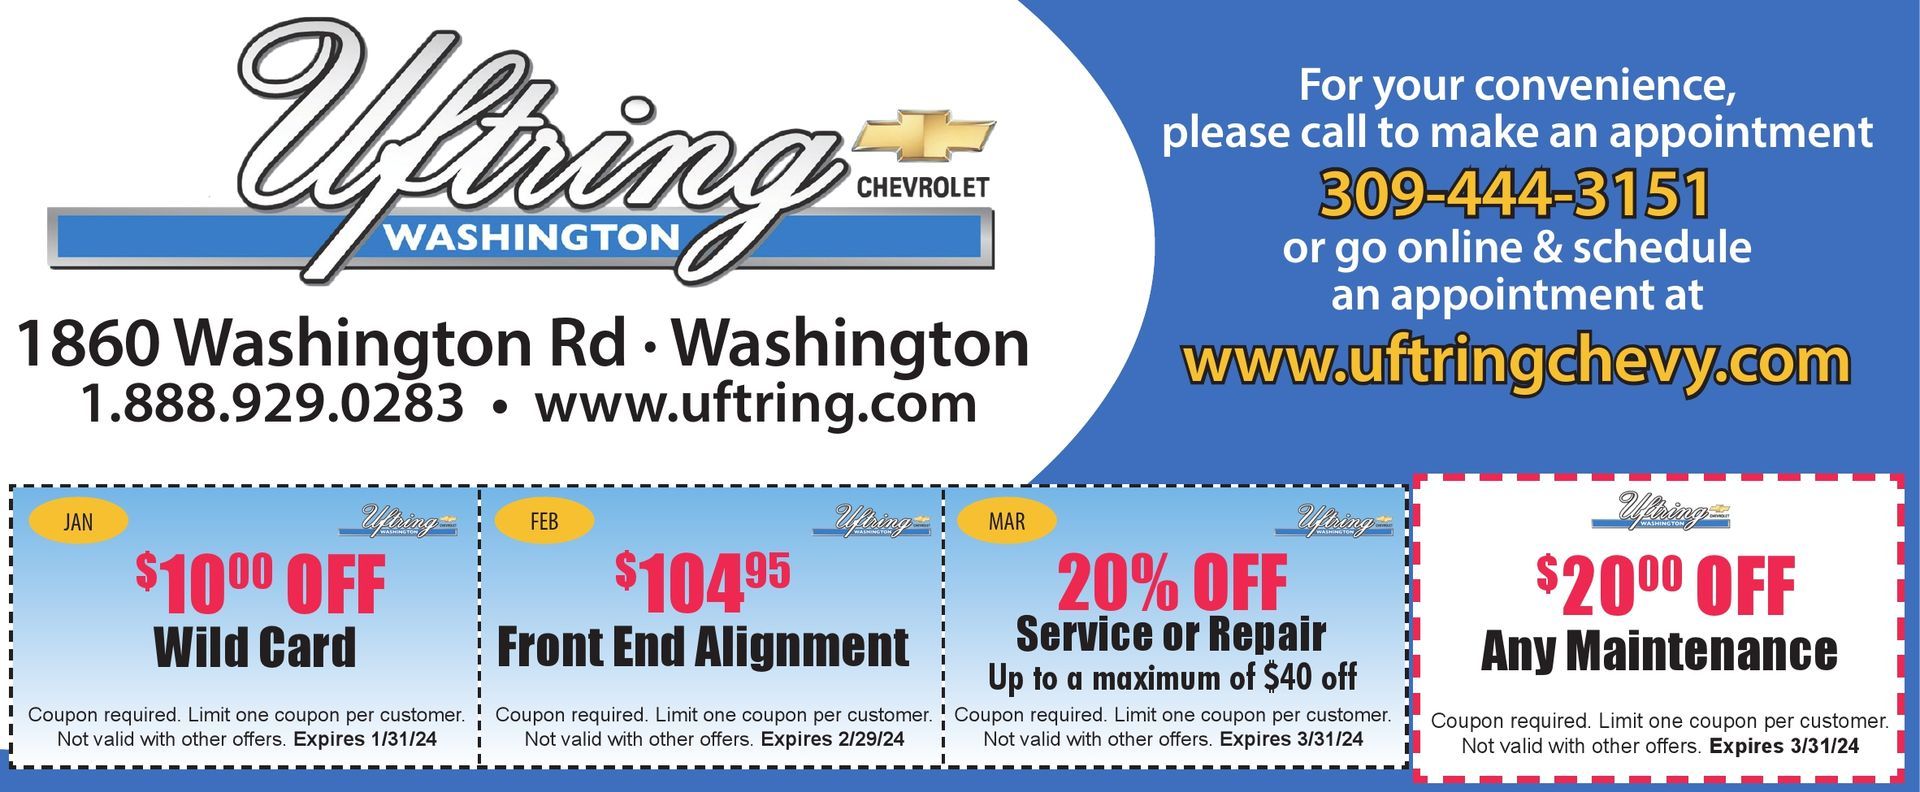 Uftring Chevy Washington $69.95 air conditioning check, $9.99 wiper blades, 20% off any service, oil change $29.95 coupons Washington, IL